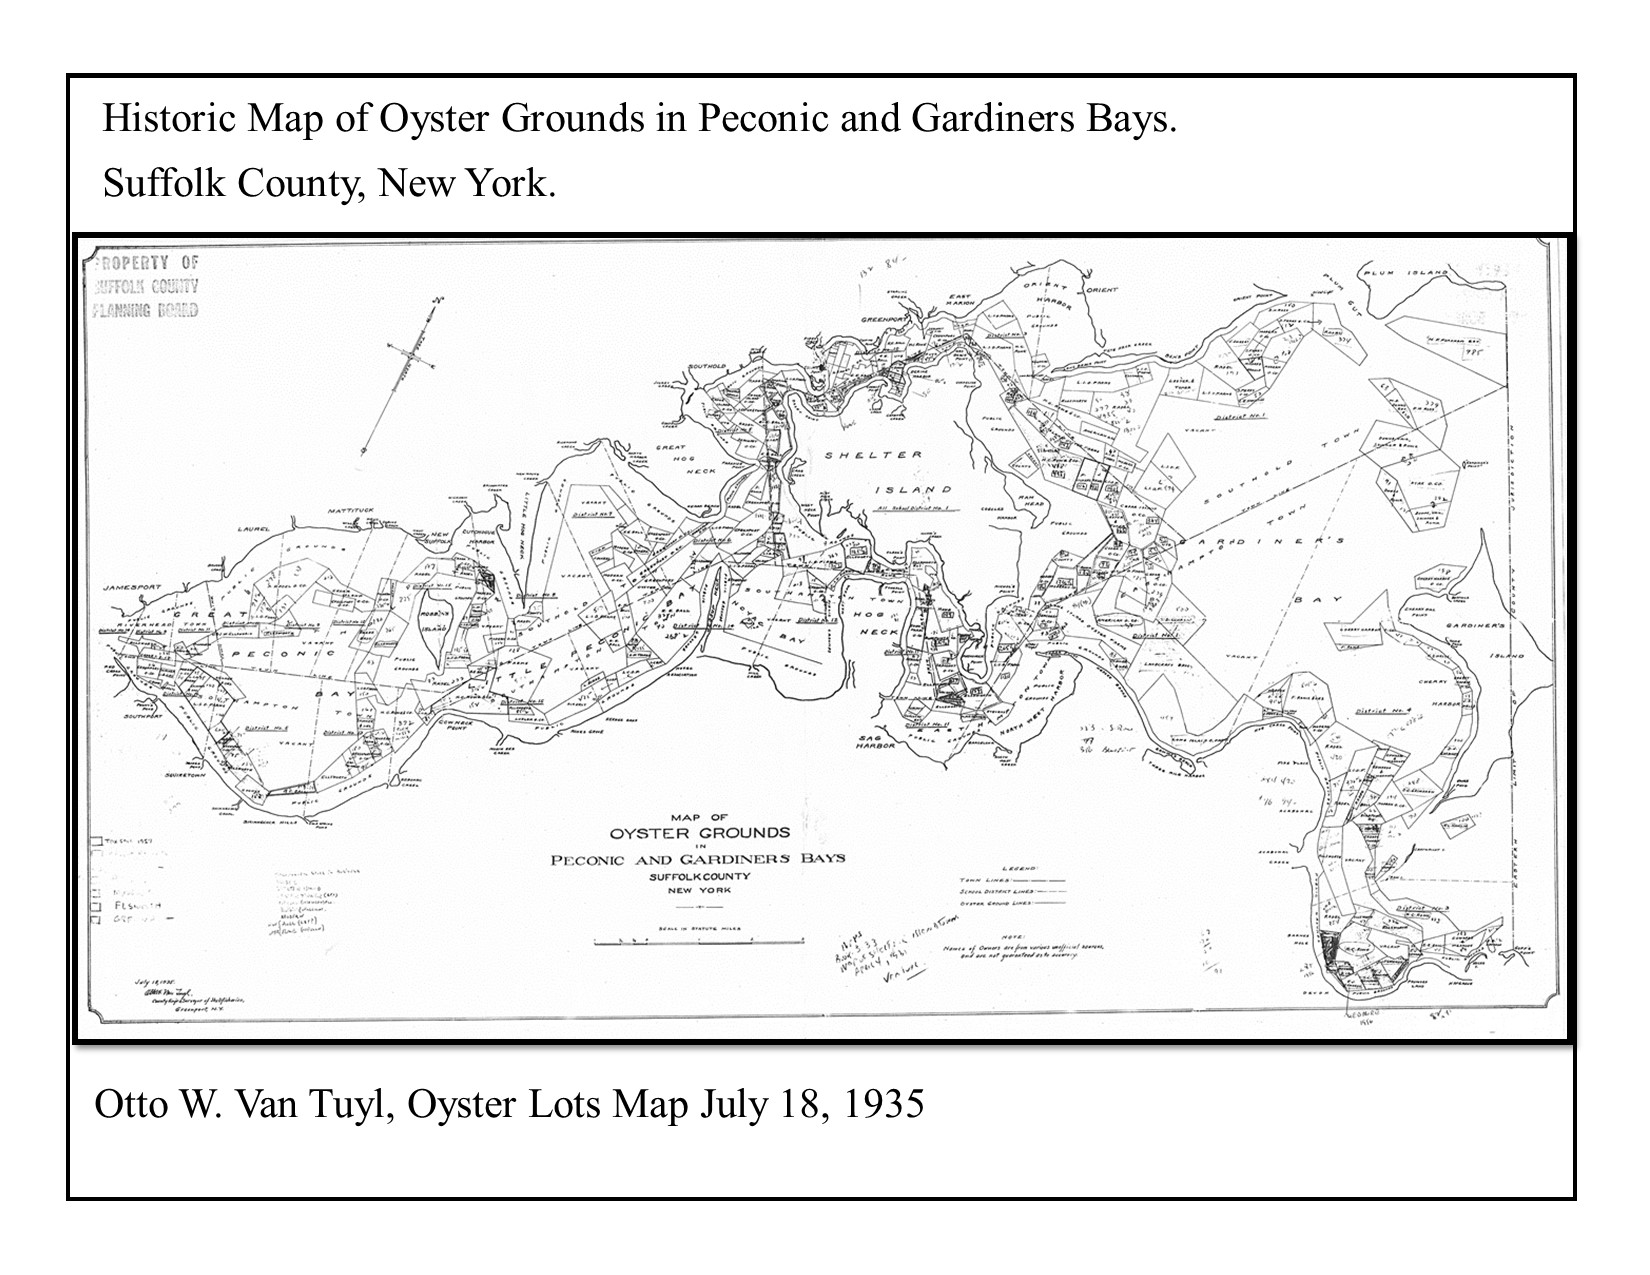 Map of the Peconic and Gardiner Bay from 1935